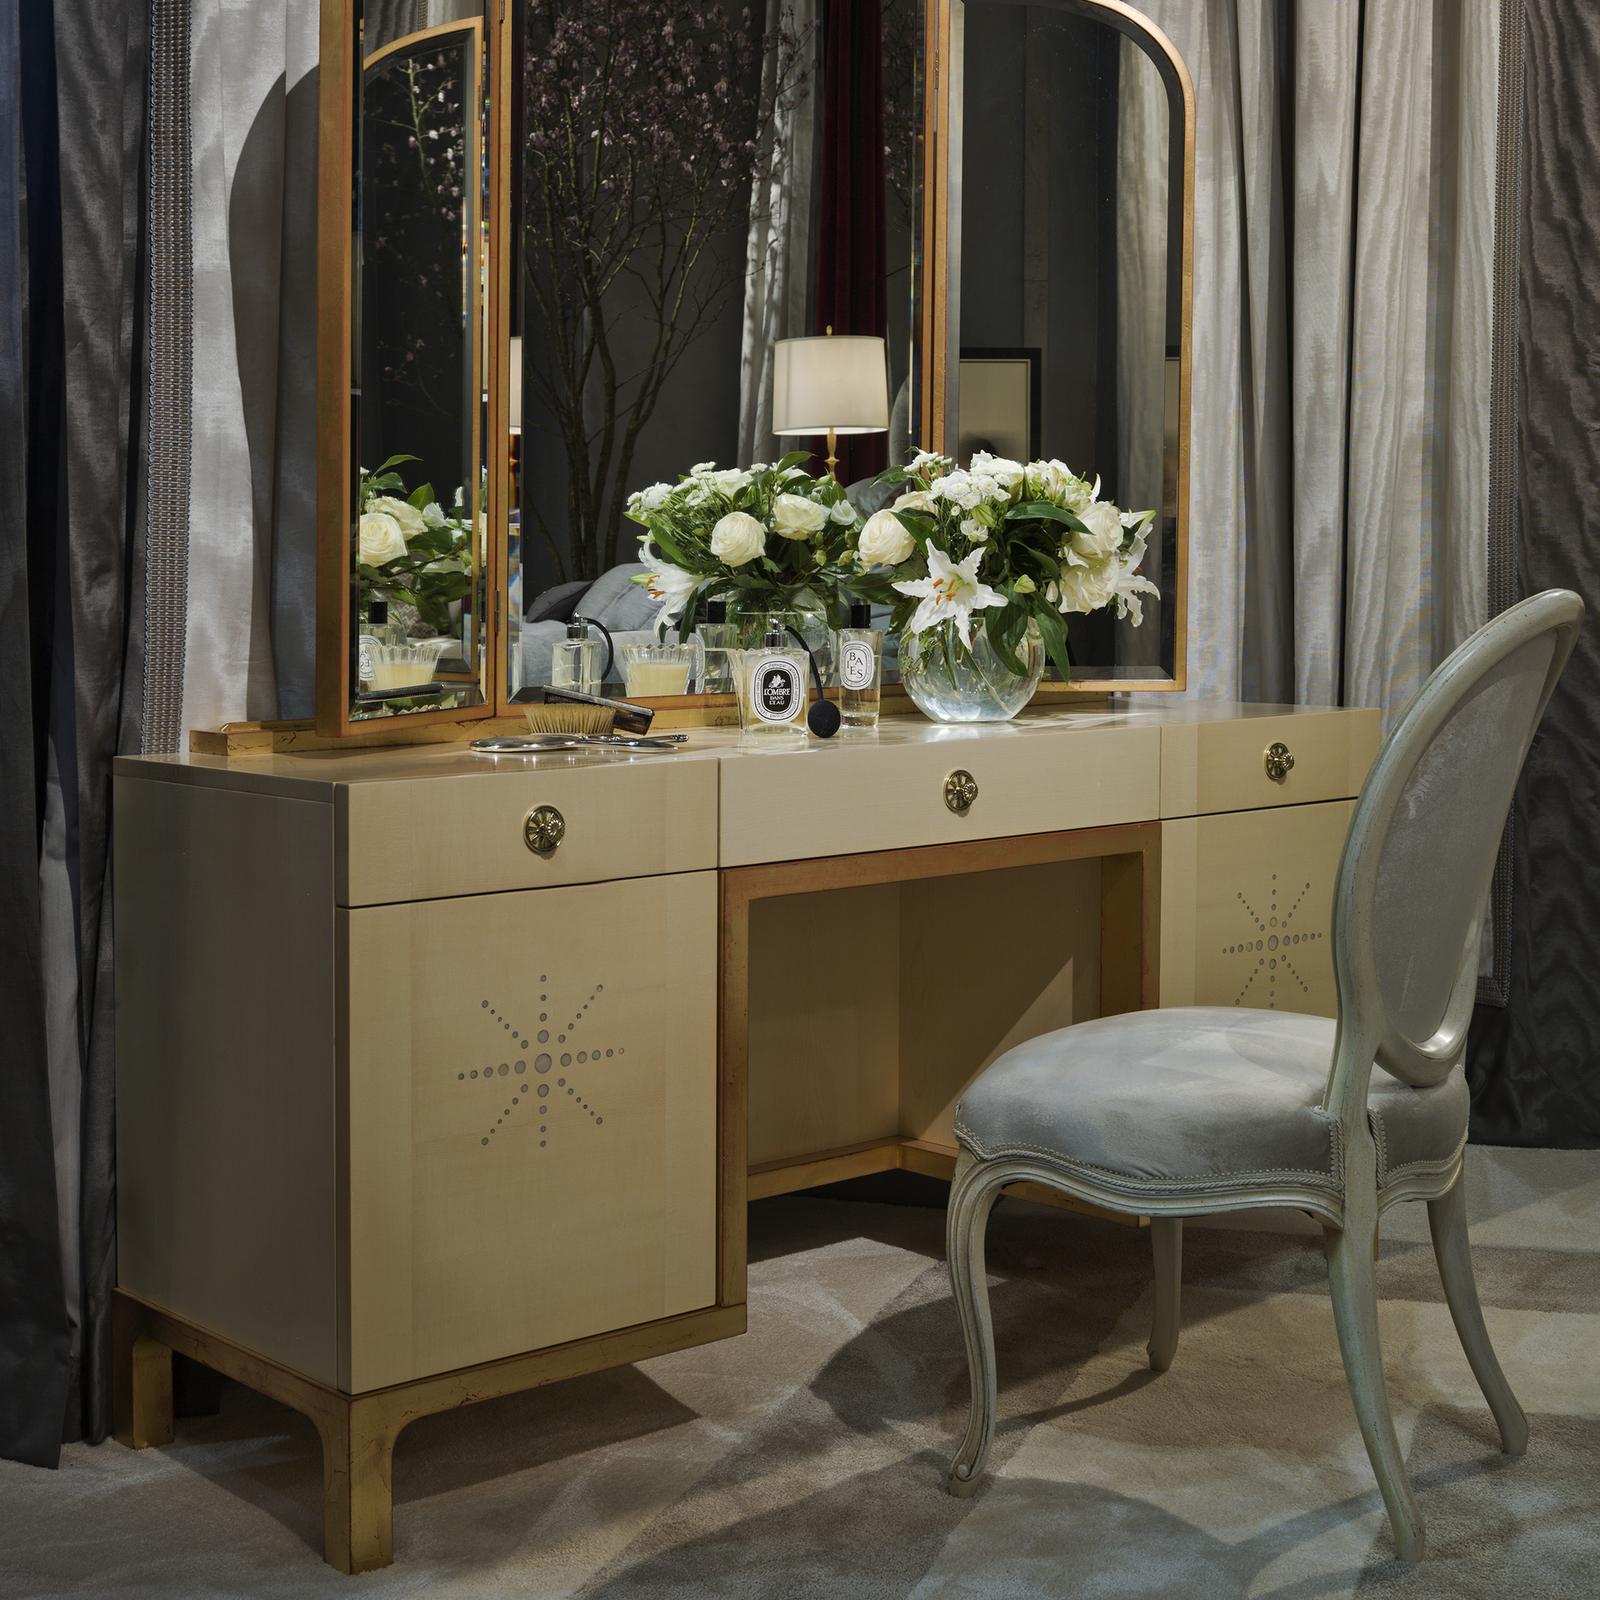 A complementing piece to the Etoile chest of drawers, this vanity table is a superb addition to a bedroom, where it will make a sophisticated statement. Completely handcrafted of maple wood, this piece features an imposing size and a stunning art